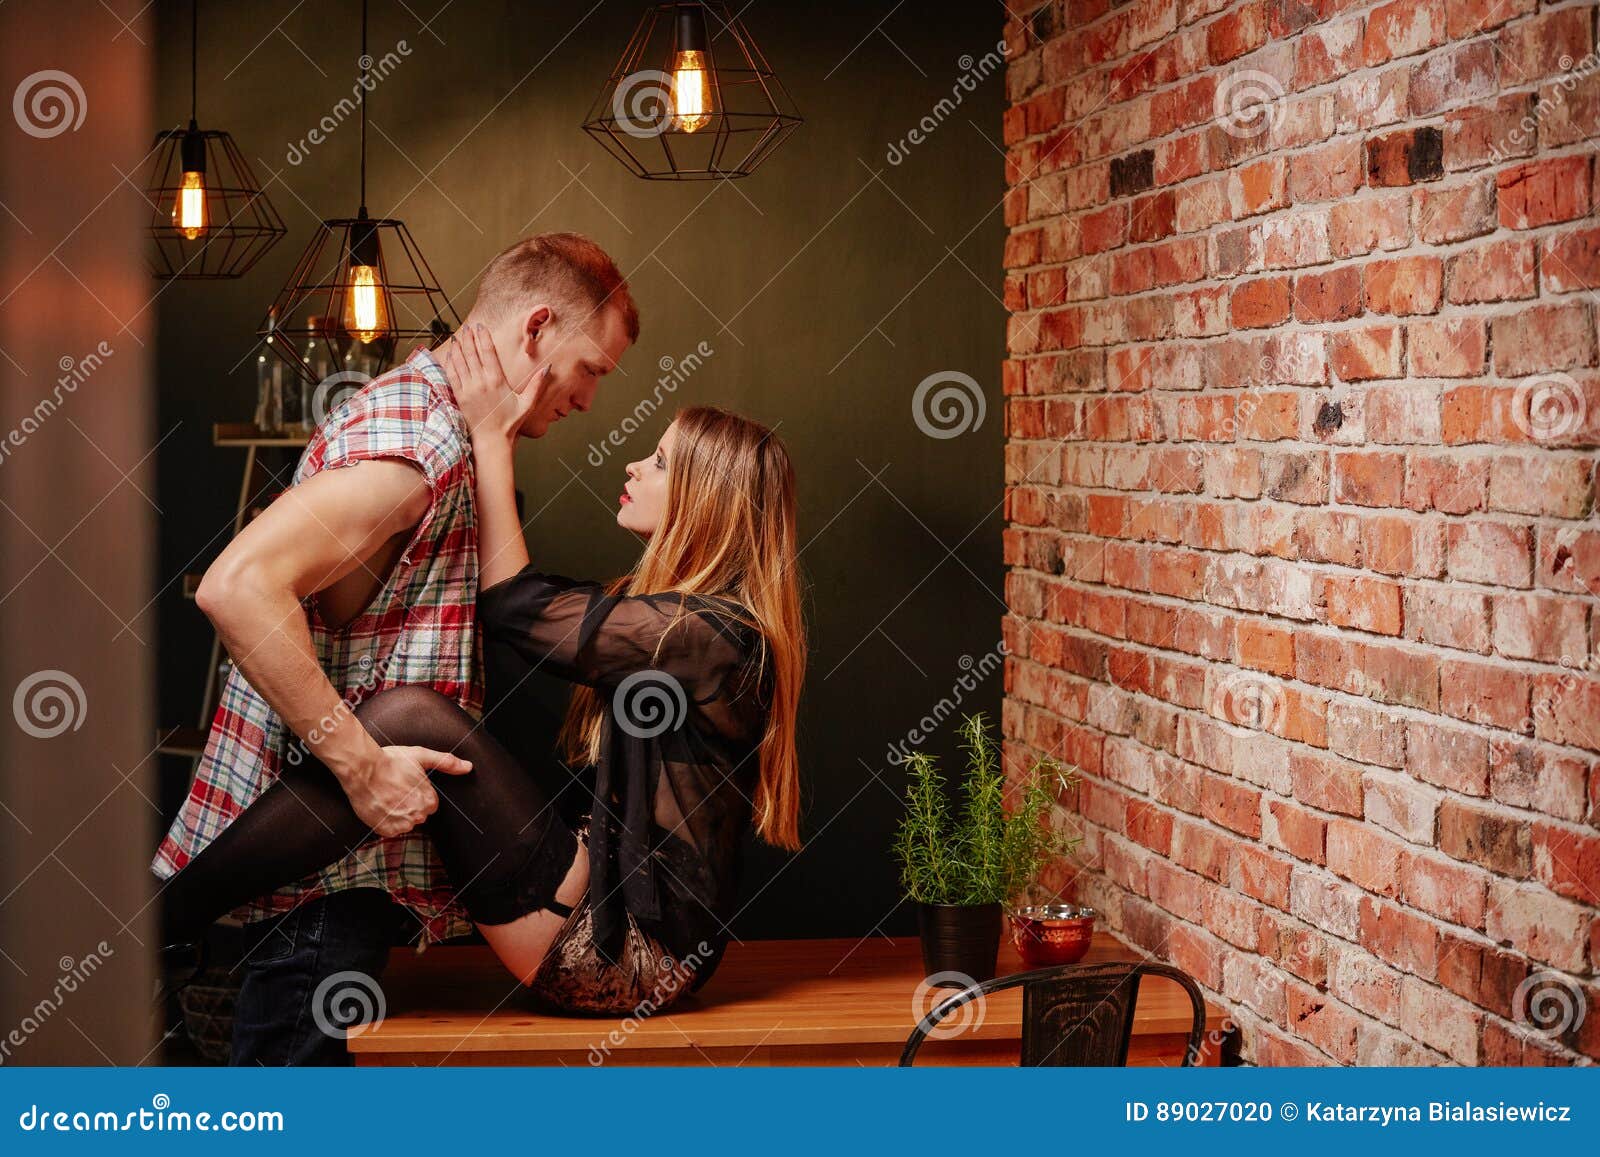 the sex having on table